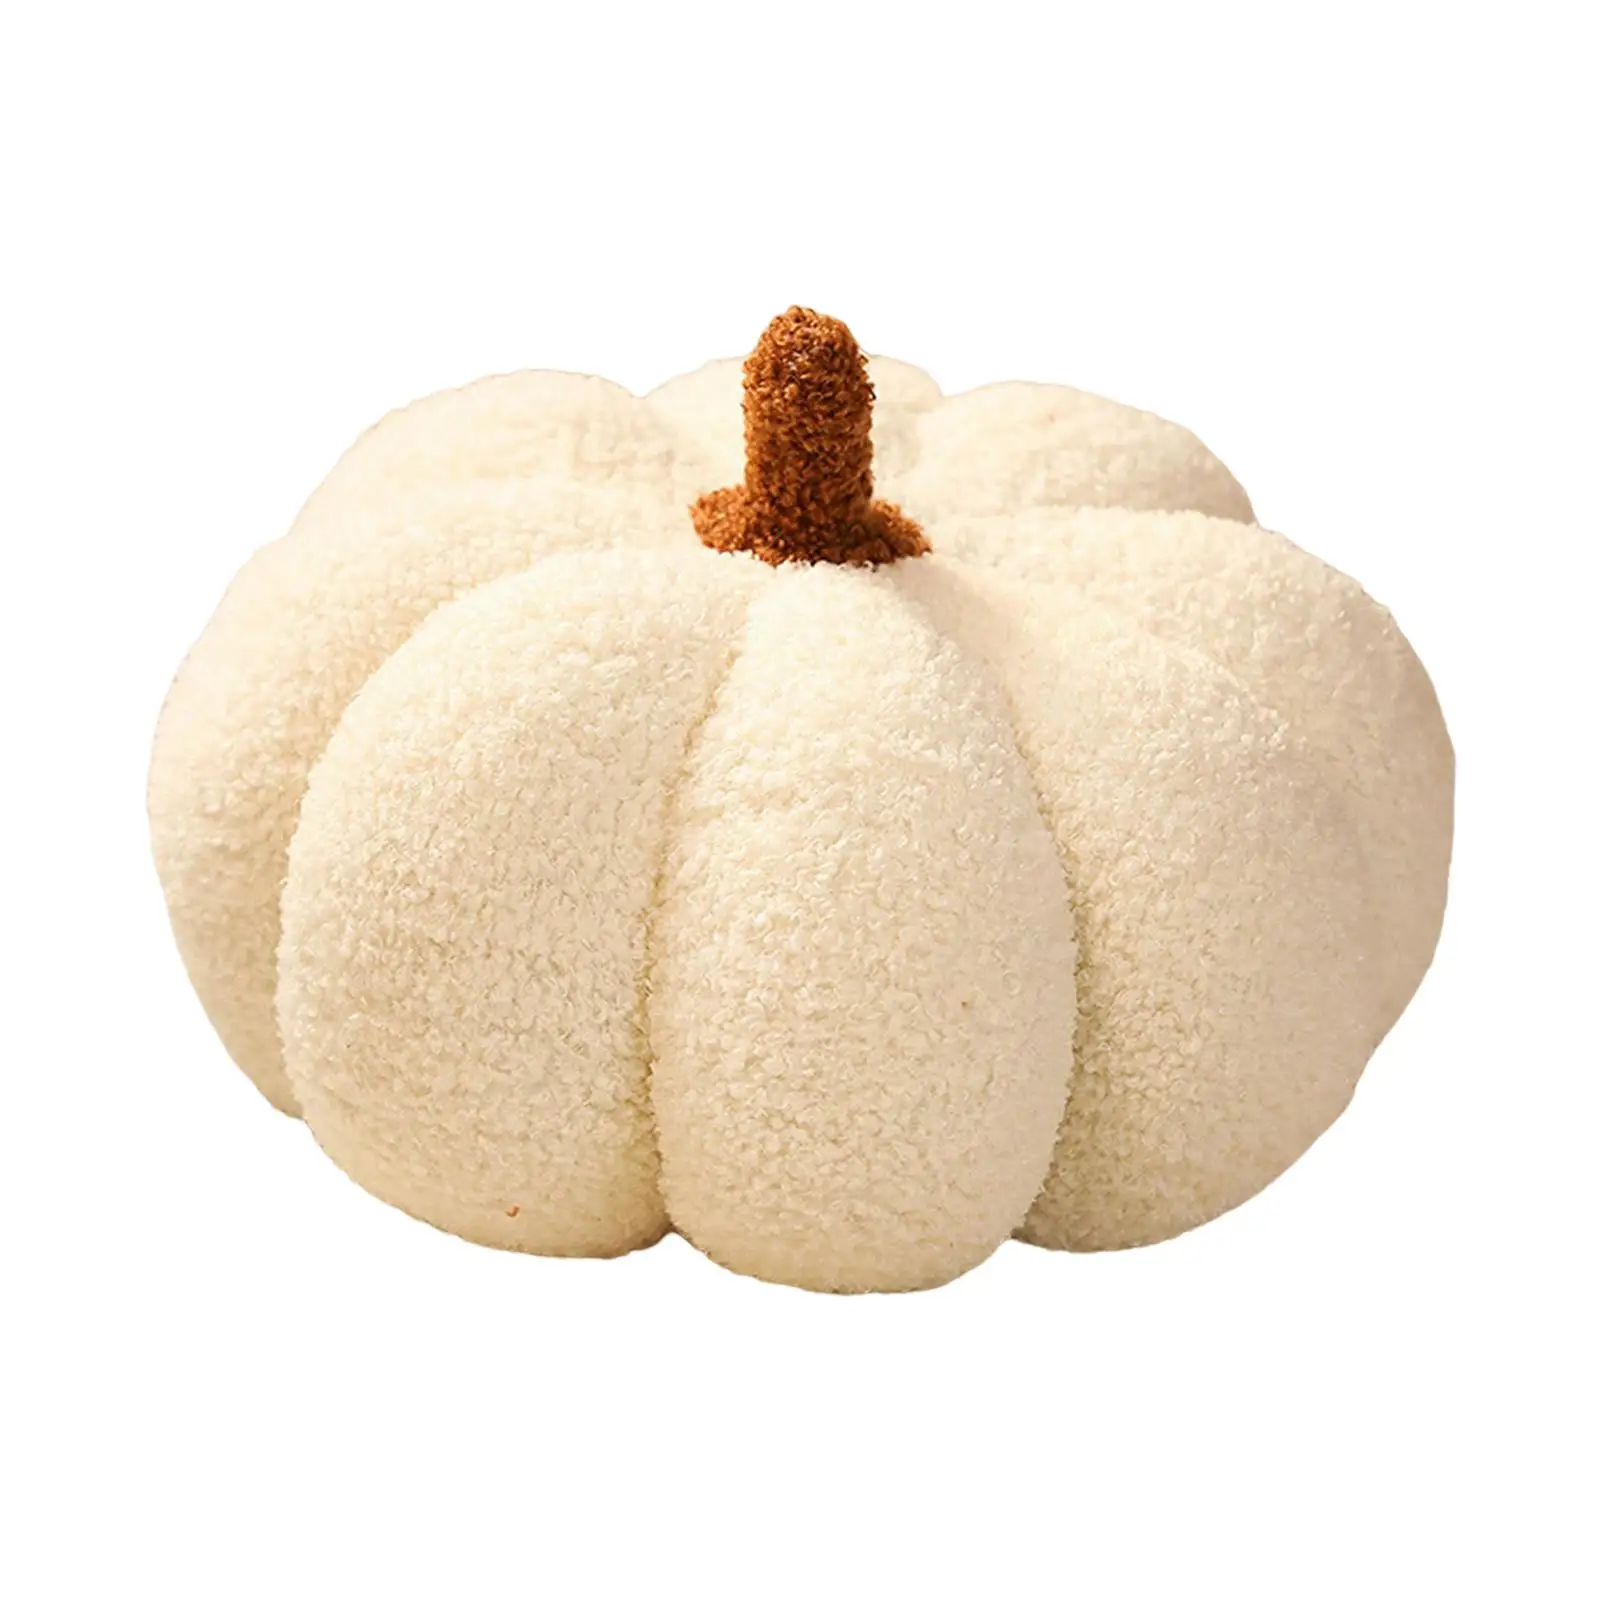 Soft Halloween Decorative Decorative Cute, Comfort Multi Purpose ,Throw Toy, for Thanksgiving Bedroom Gift